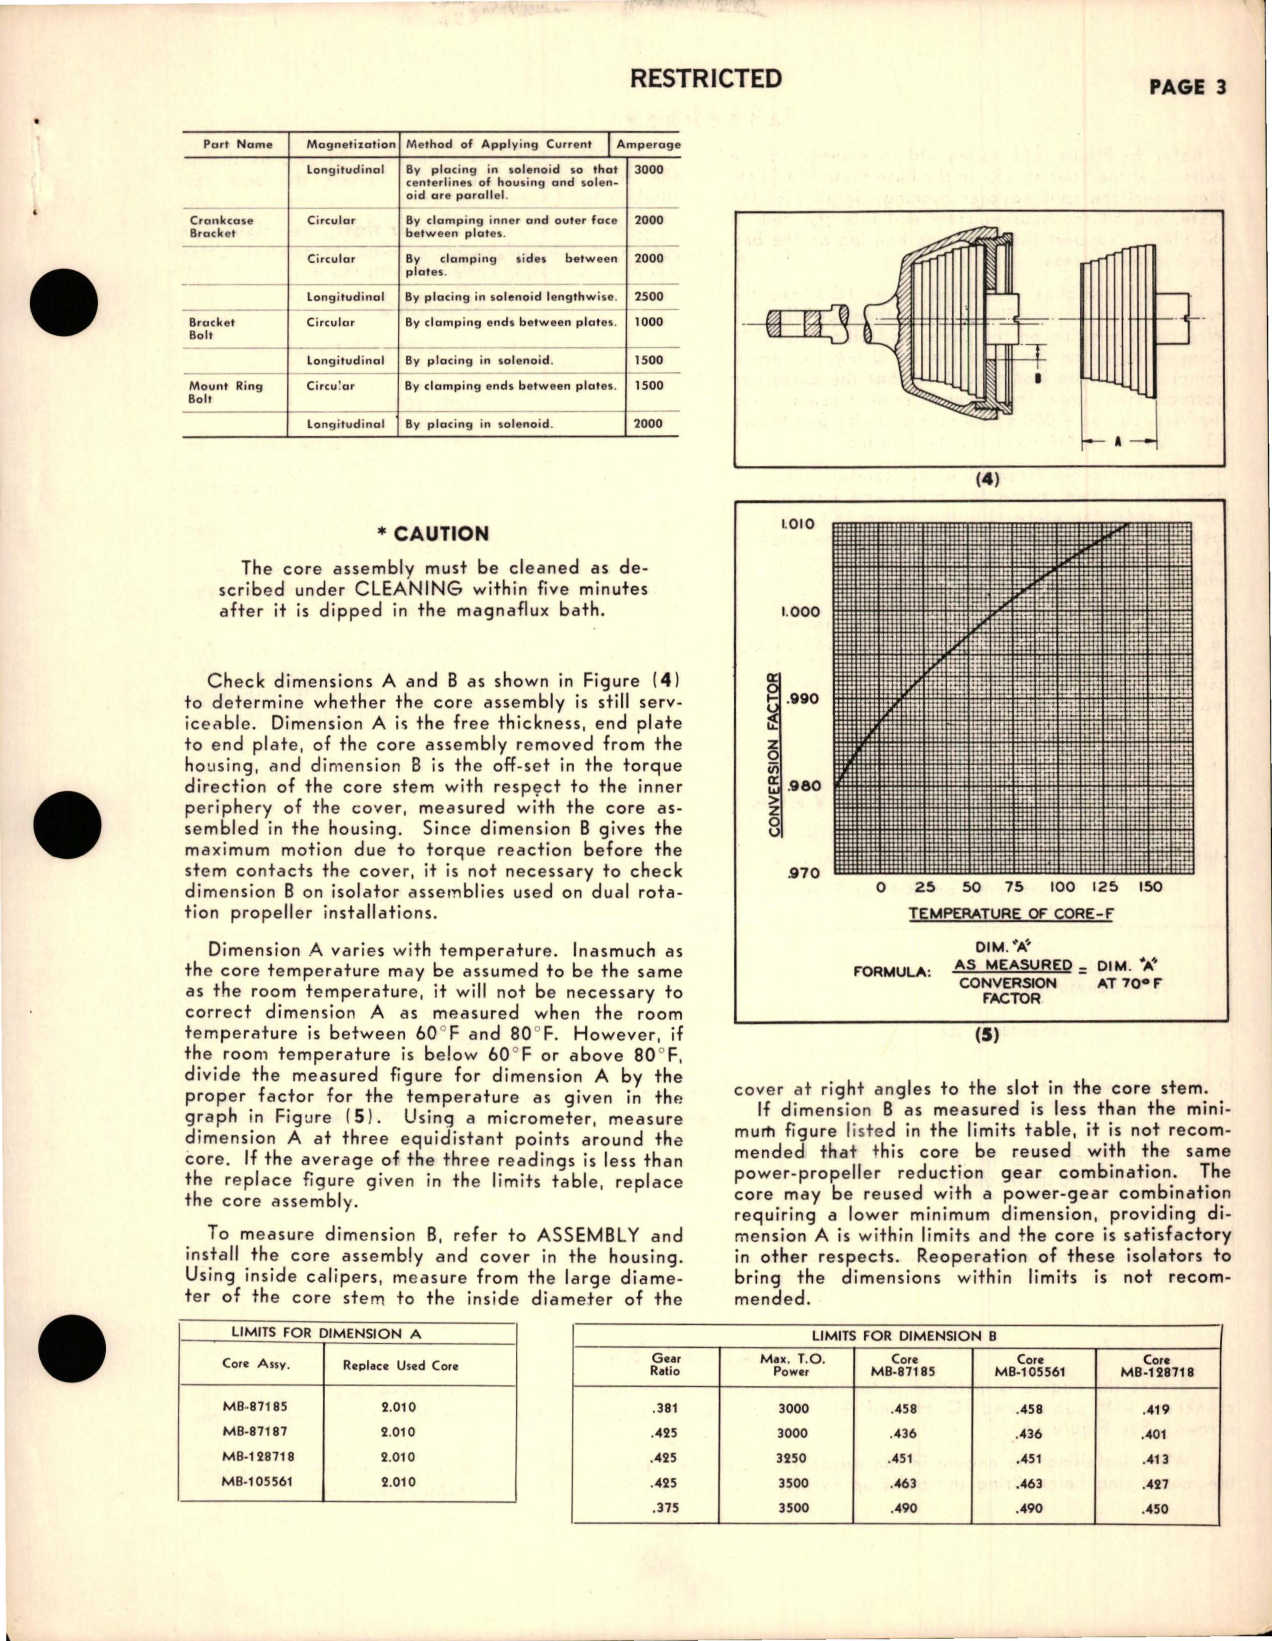 Sample page 5 from AirCorps Library document: Instructions with Parts List for Engine Vibration Isolators - MB-83889, MB-99259, MB-88427, MB-99258, and MB-105971